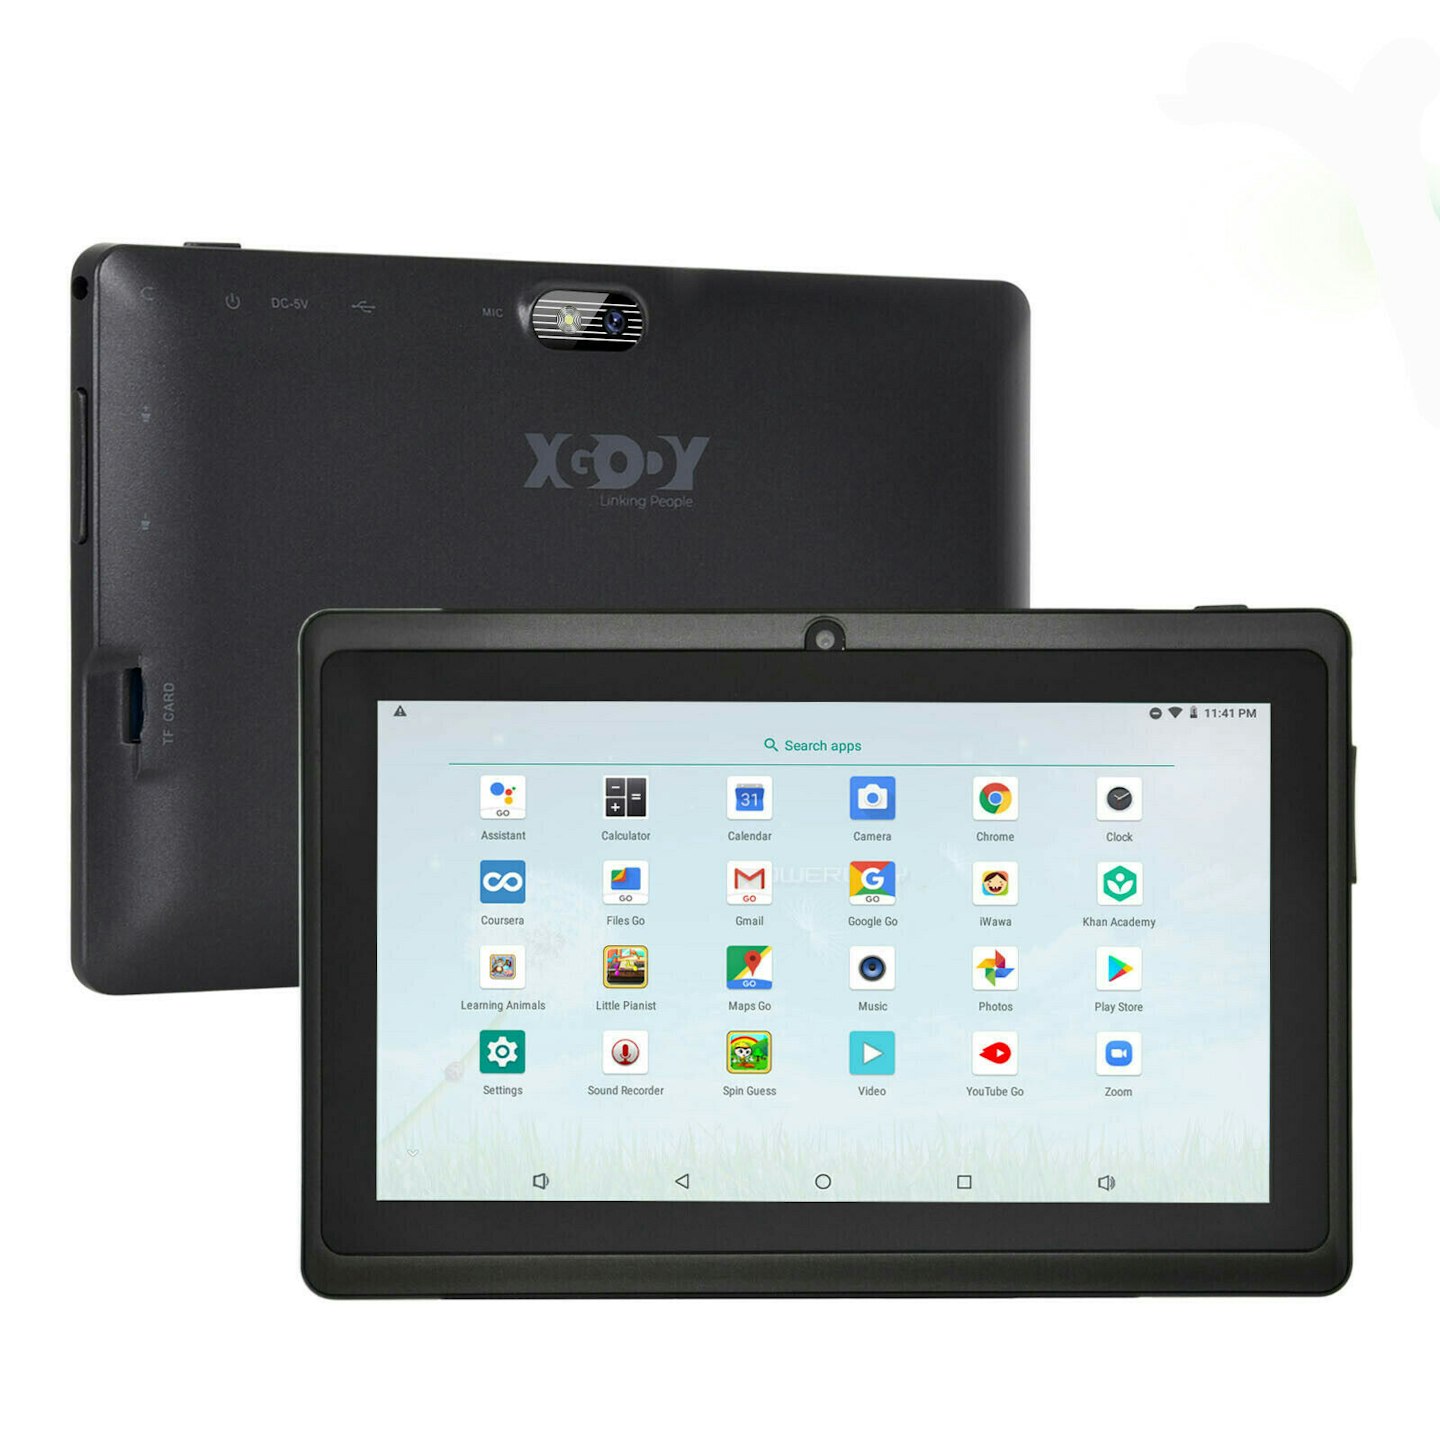 XGODY 7" Android Tablet 16GB Quad Core Dual Cam Bluetooth WiFi Kids Tablet PC HD